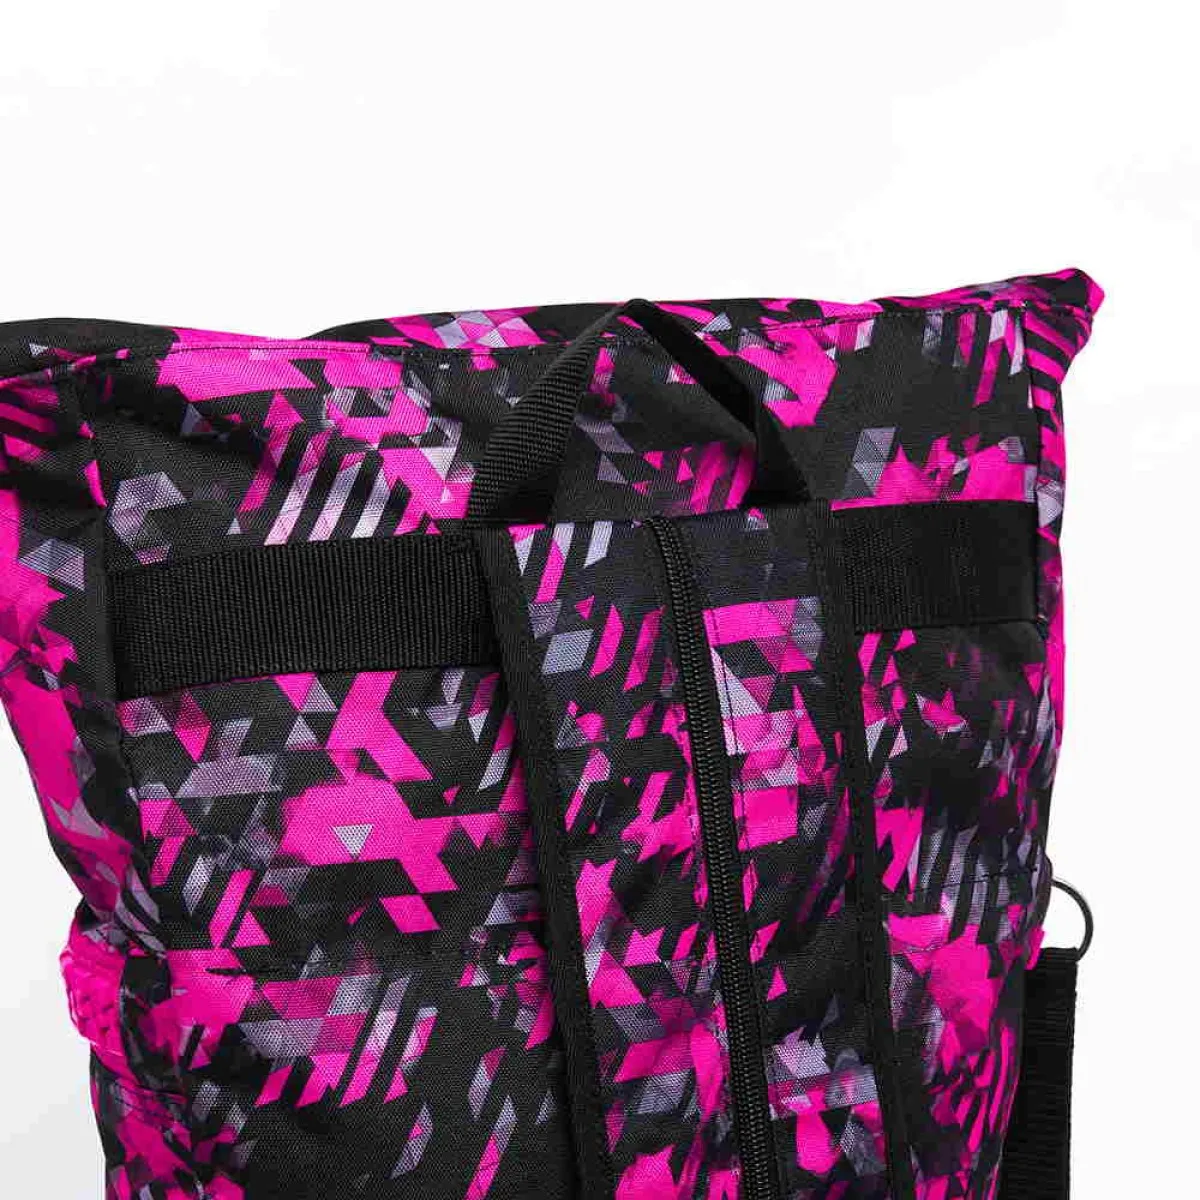 adidas duffel bag - sports backpack camouflage pink